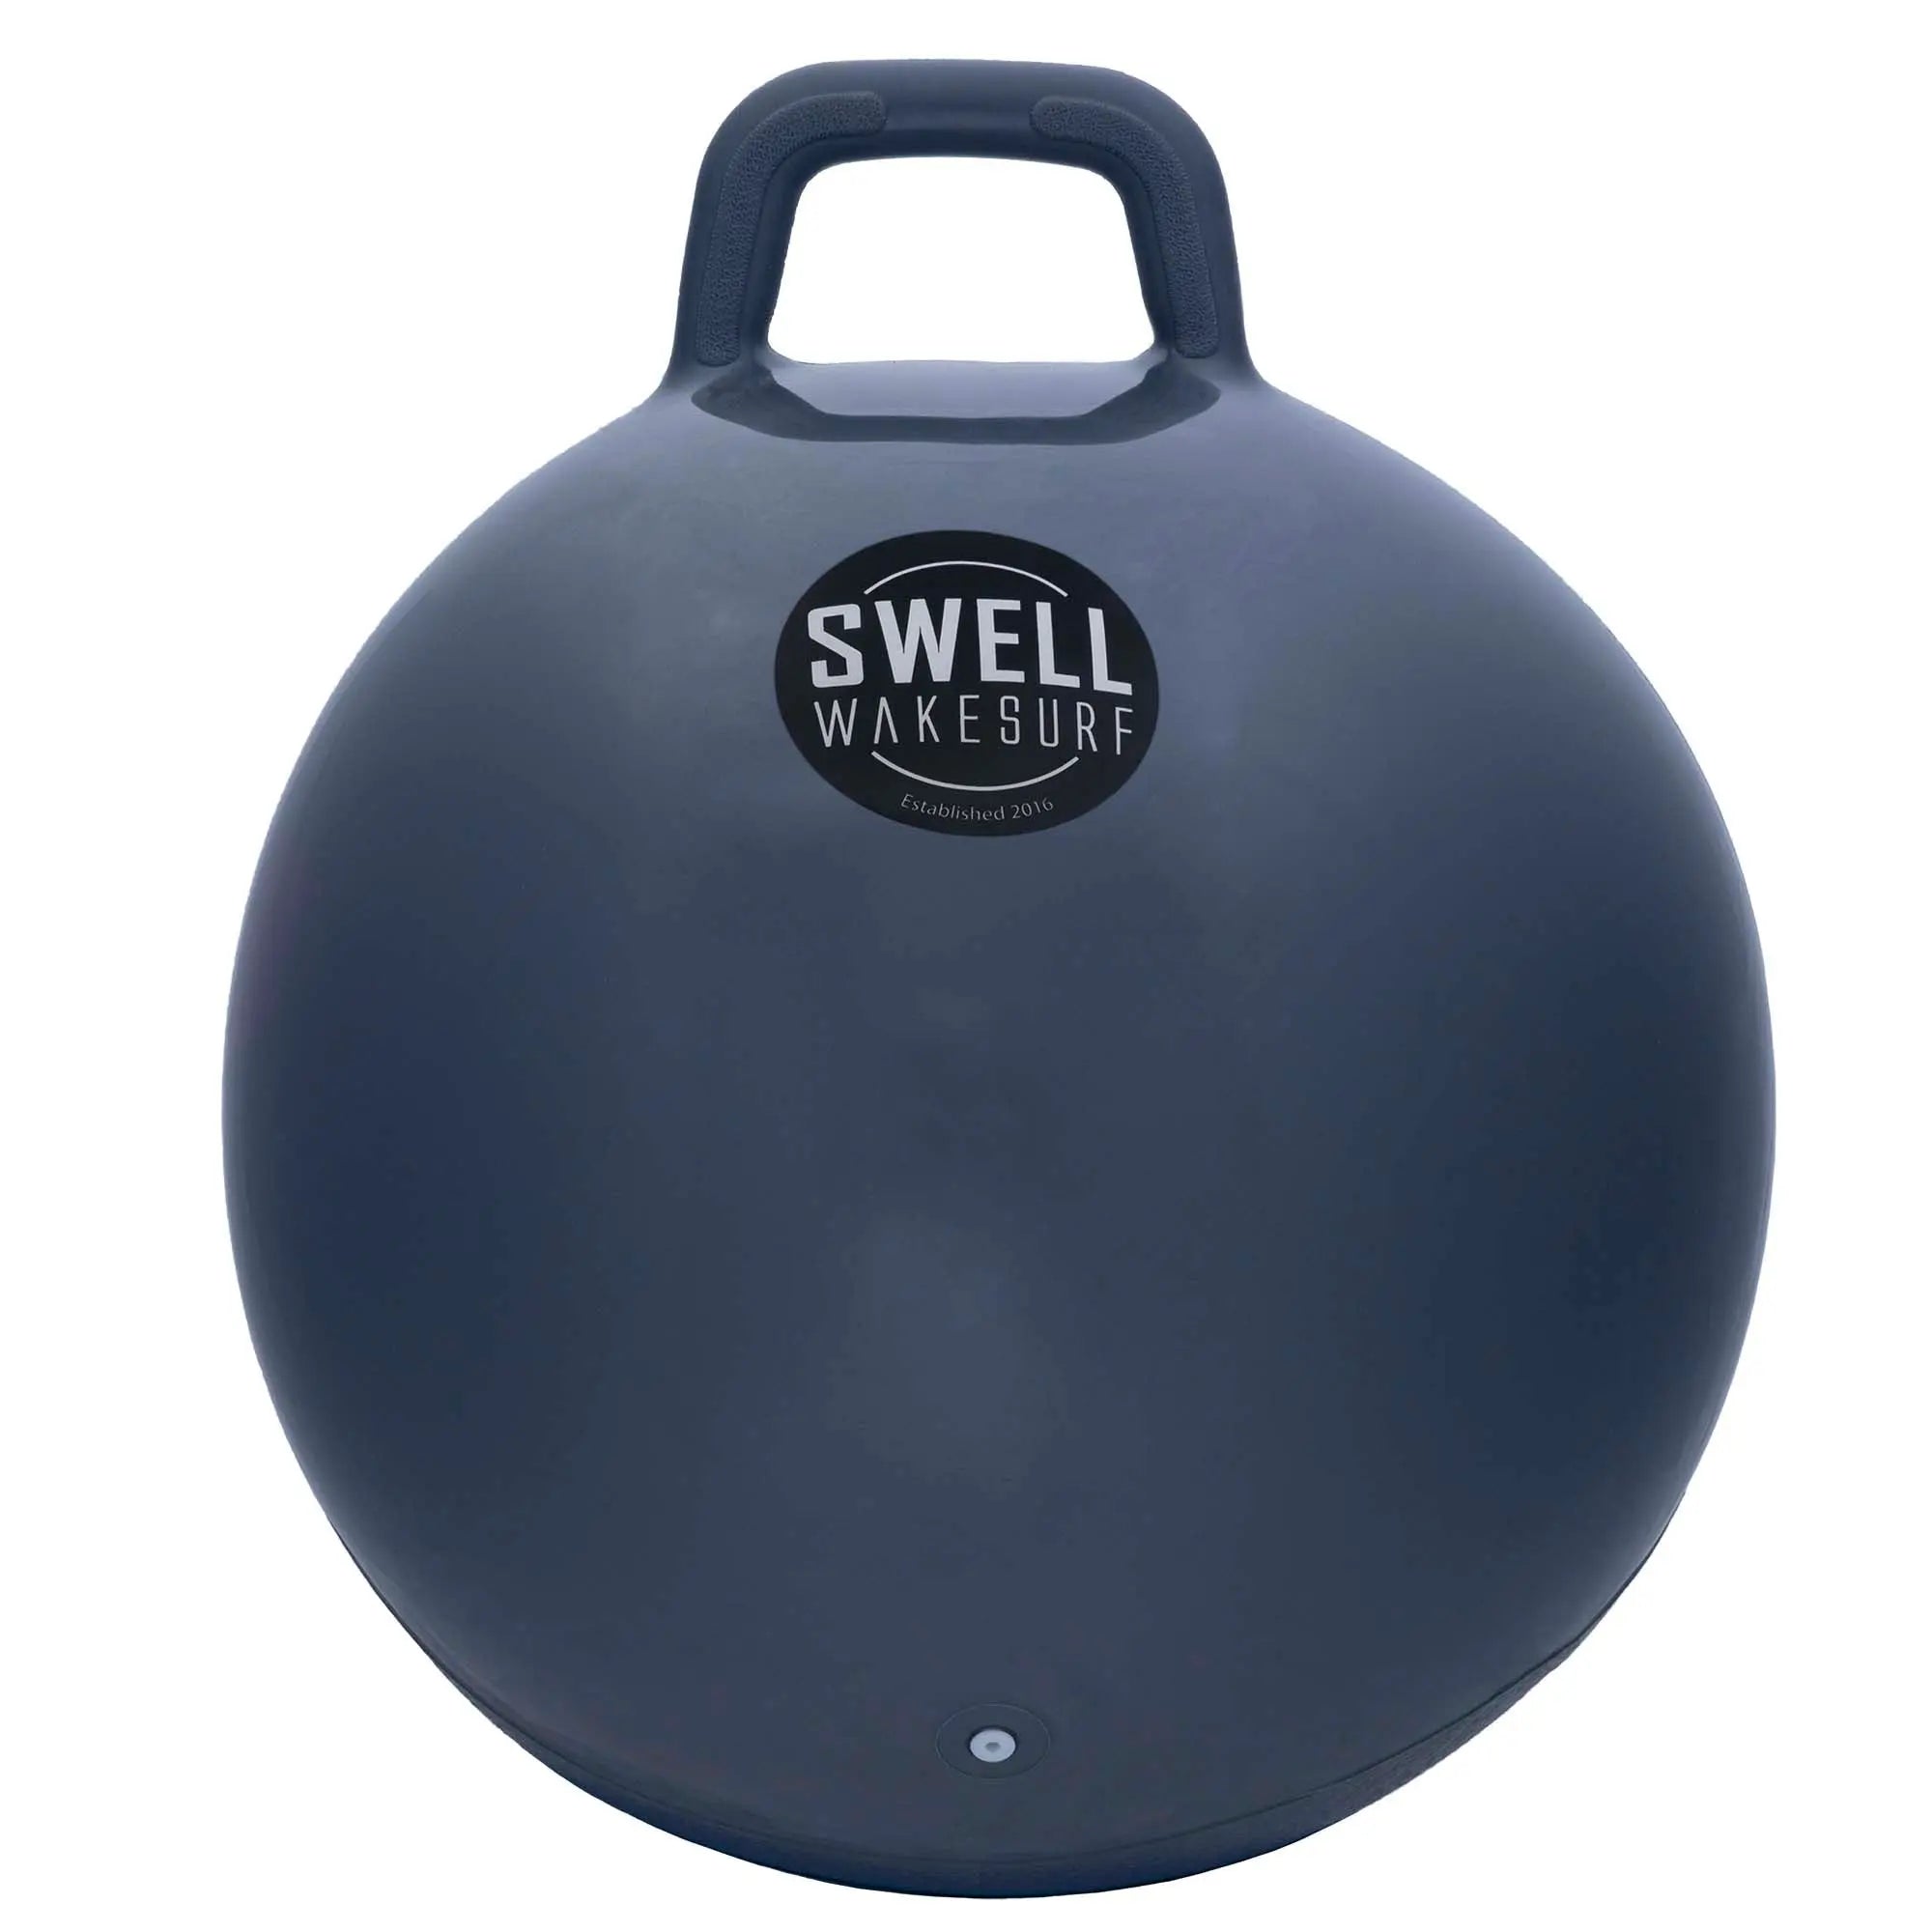 Swell Wakesurf - Original Buoy Ball Inflatable Bumper - for Tie-Ups Grey